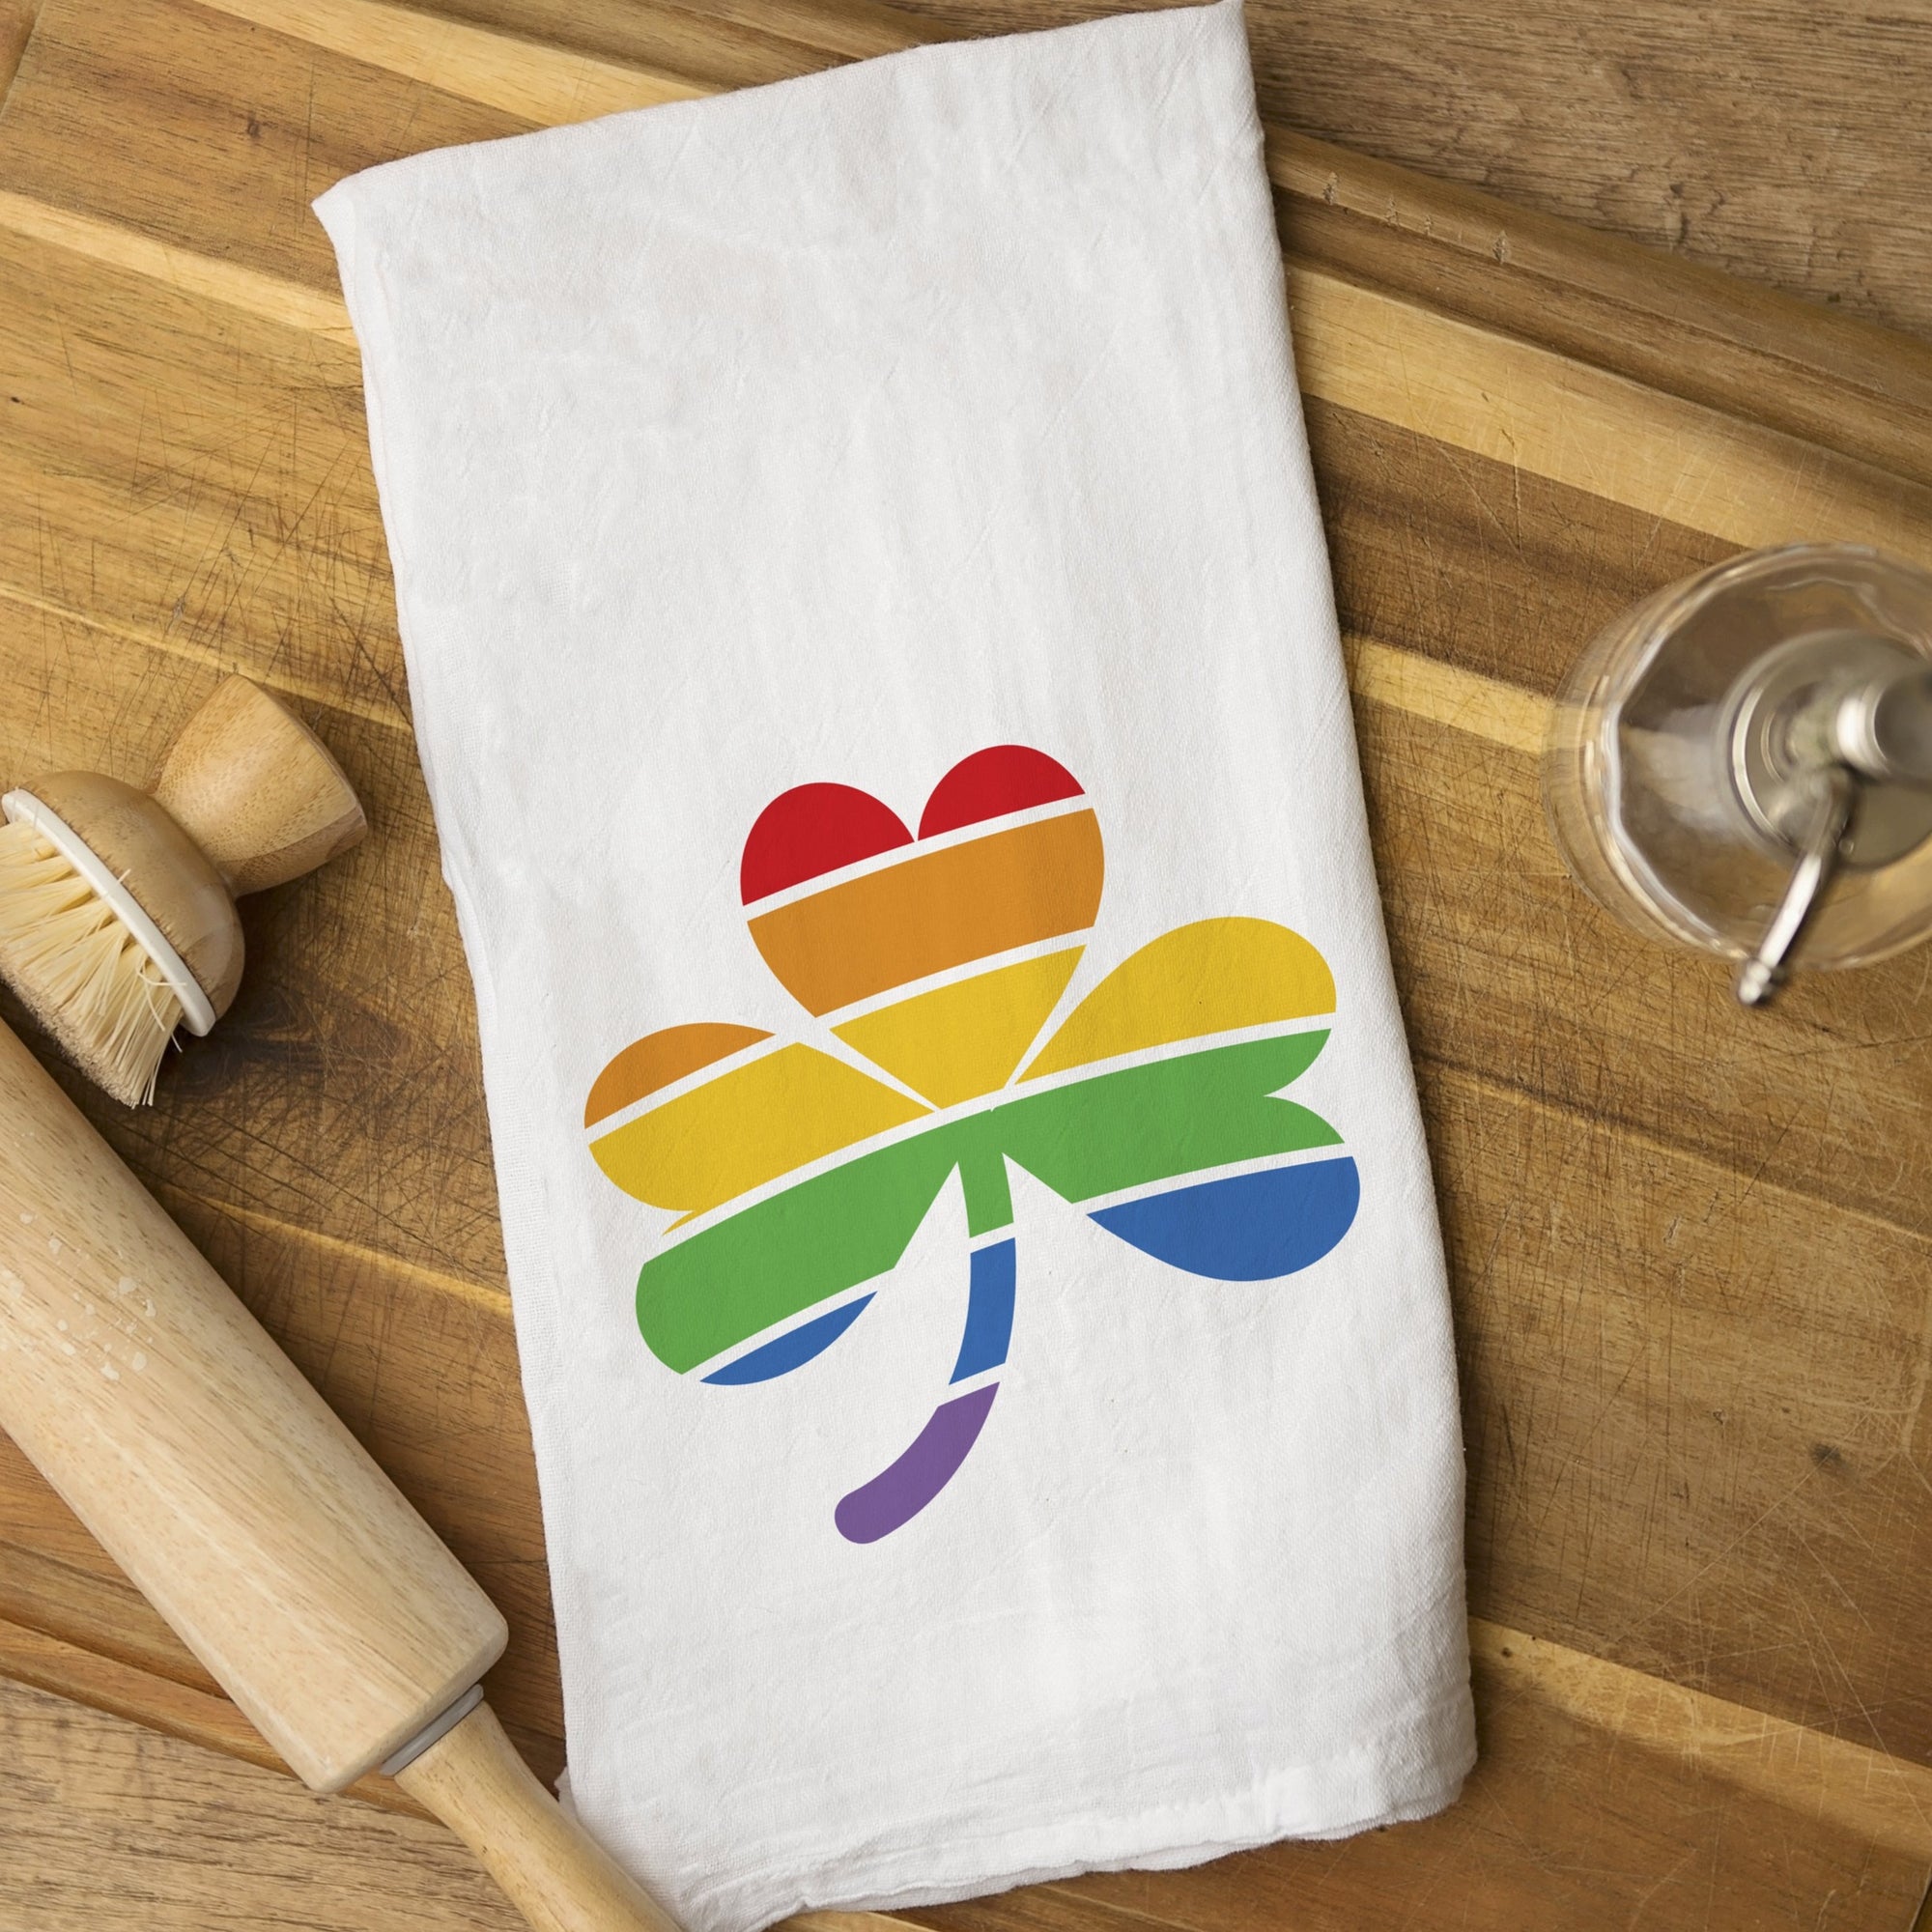 Rainbow Shamrock •  Made in the USA, seasonal kitchen tea towel, dish towel, hand towel, Hand printed in our Nashville Studio •  100% cotton white flour sack tea towel •  Measures 28”x29” •  Printing is done with eco-friendly water-based inks •  Super soft print (We do NOT use vinyl or decals) •  Machine Washable PIPSY.COM